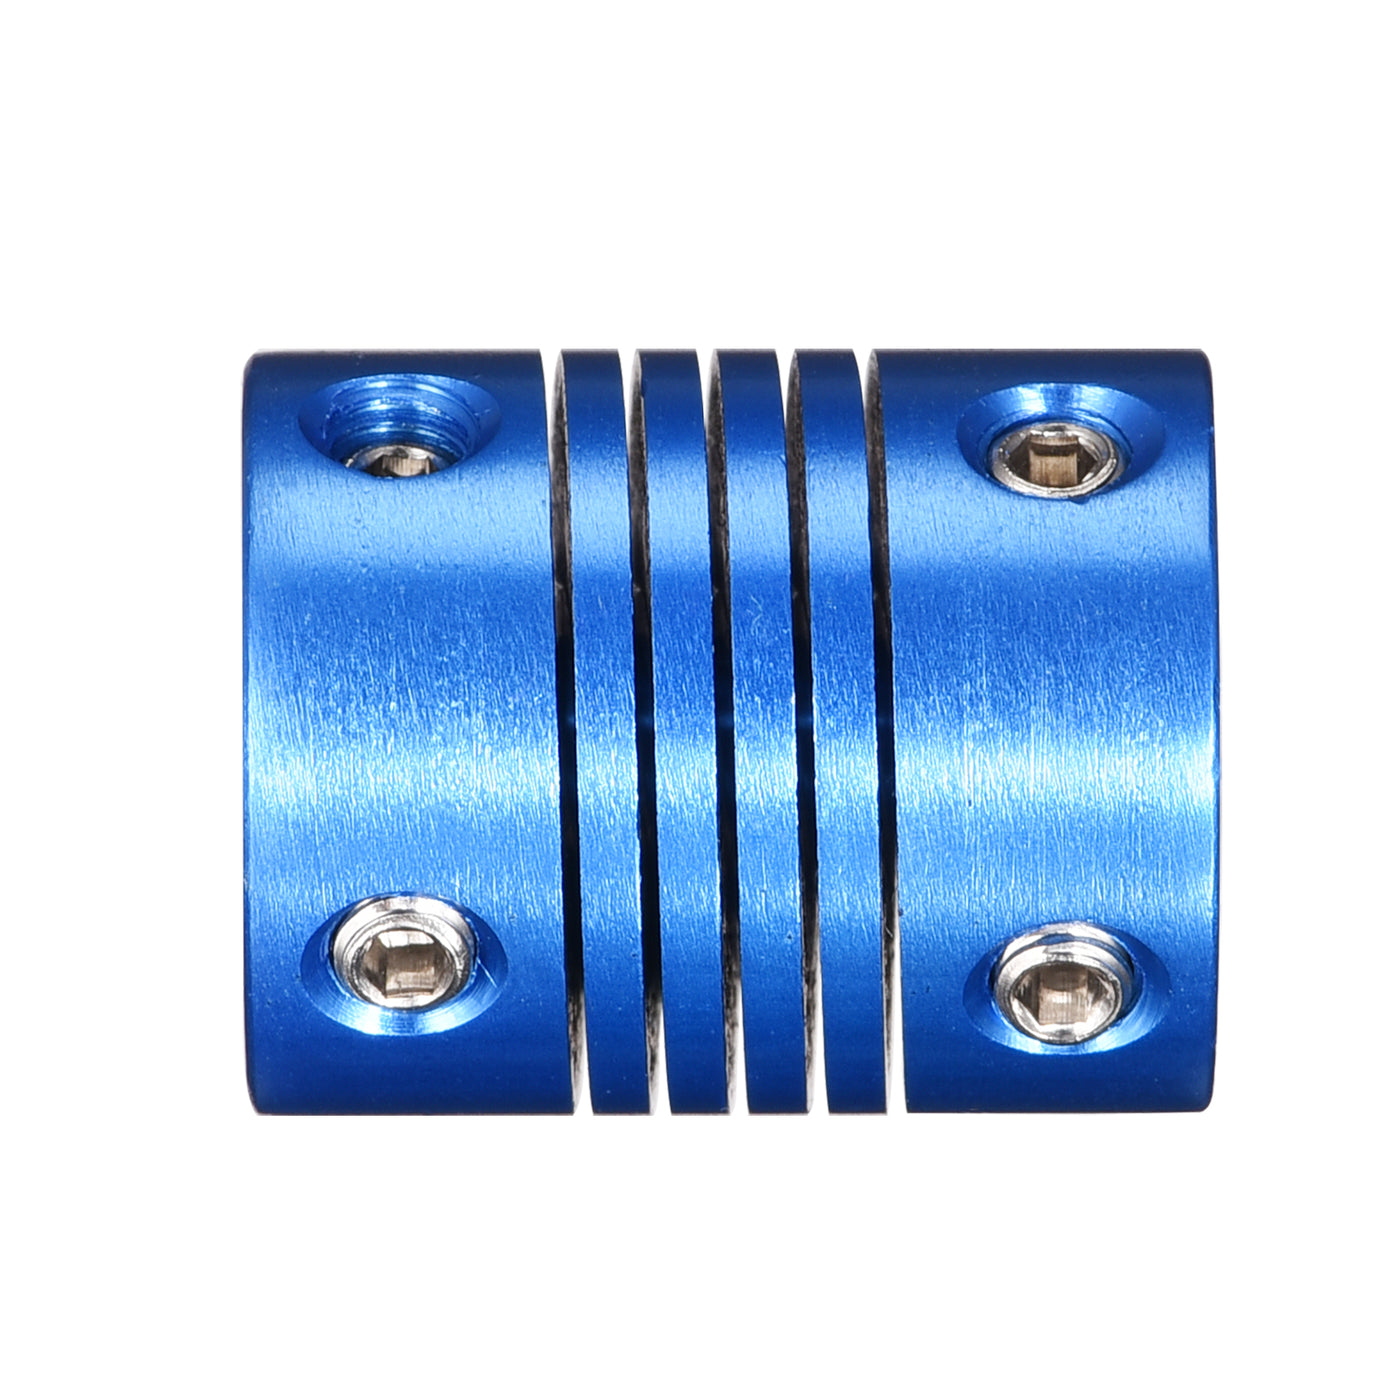 uxcell Uxcell 5 Pcs 5mm to 4mm Aluminum Alloy Shaft Coupling Flexible Coupler L25xD20 Blue